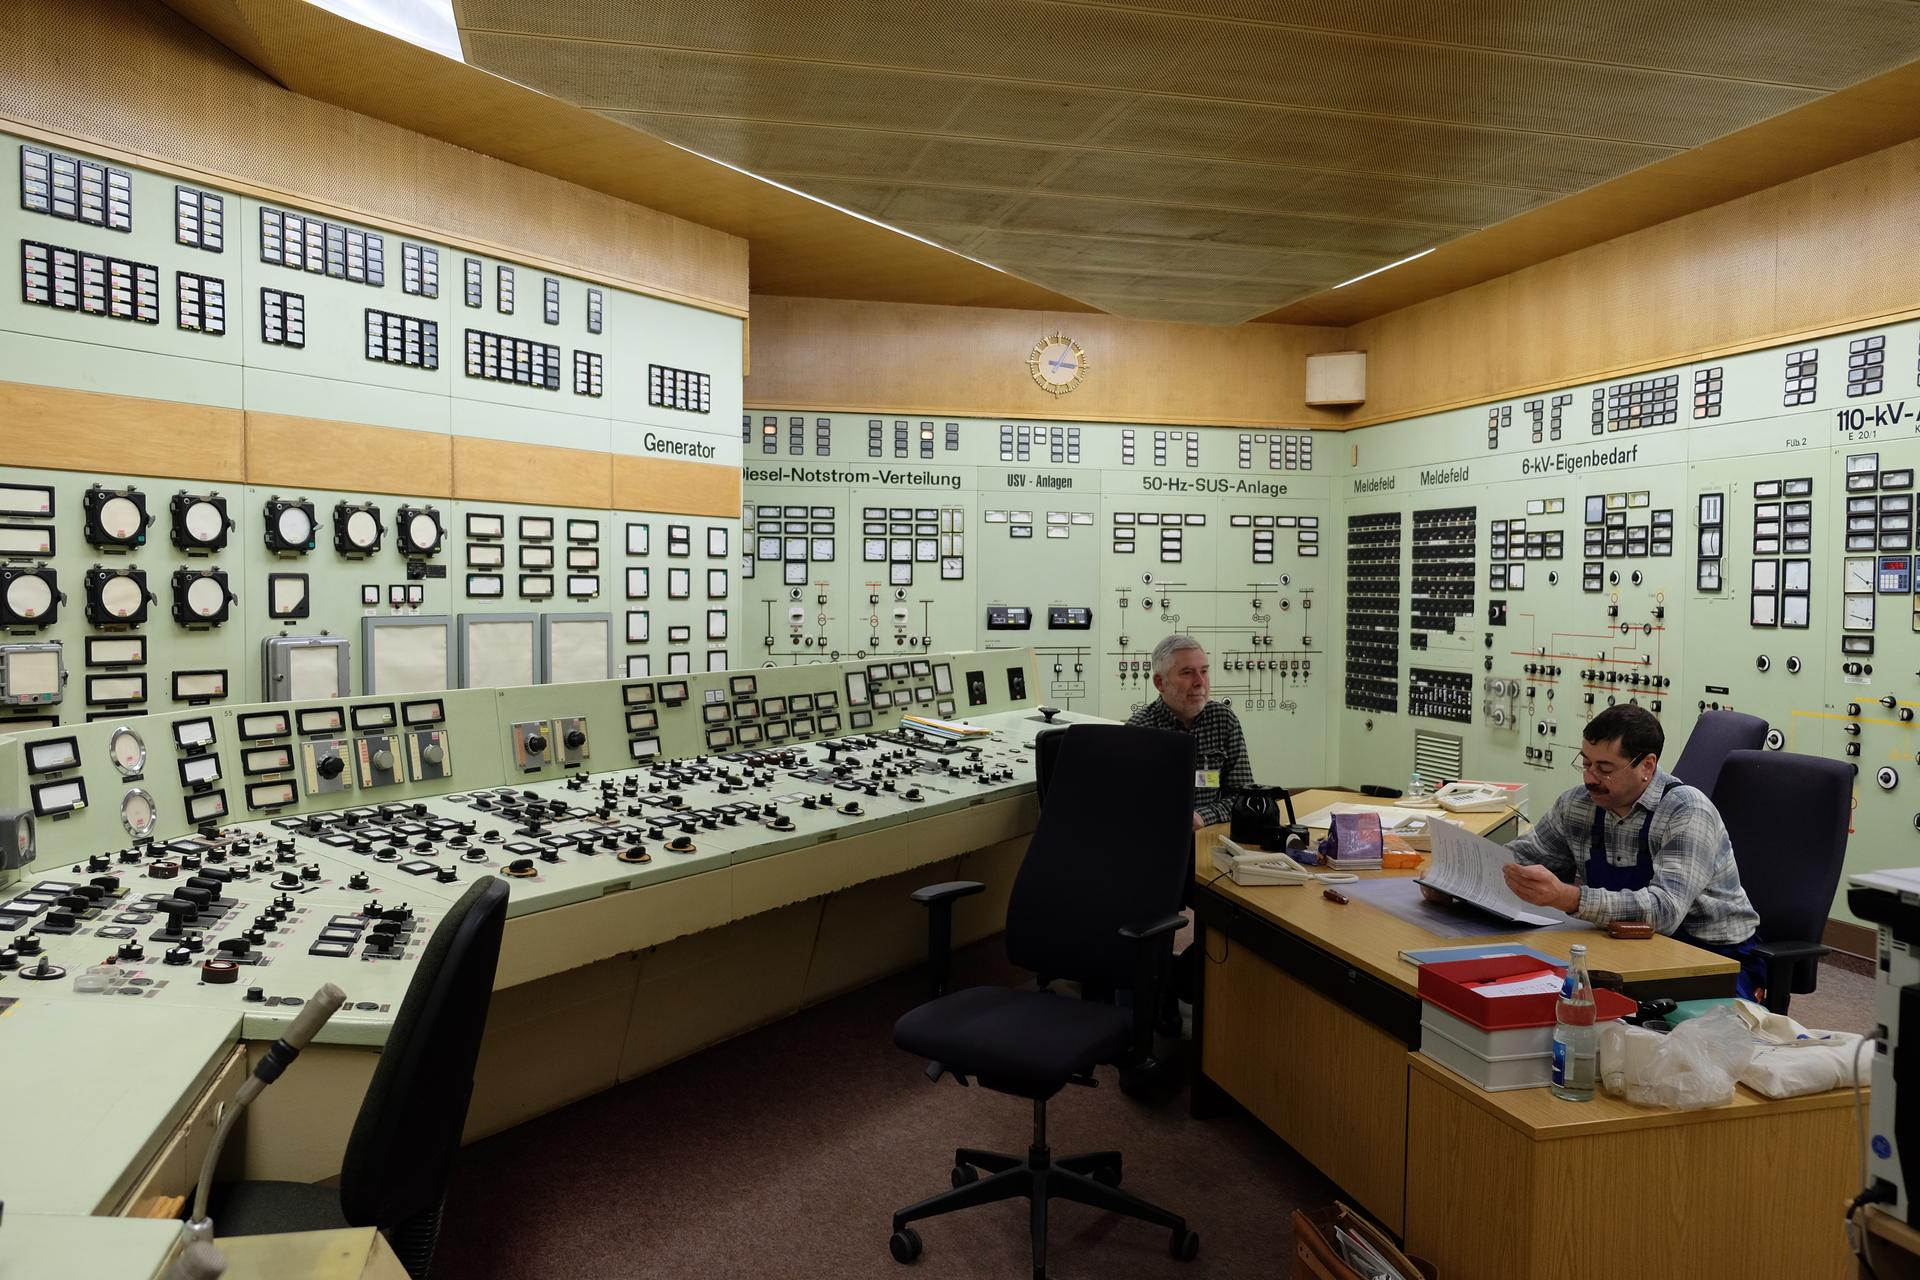 The control room of the Rheinsberg nuclear plant